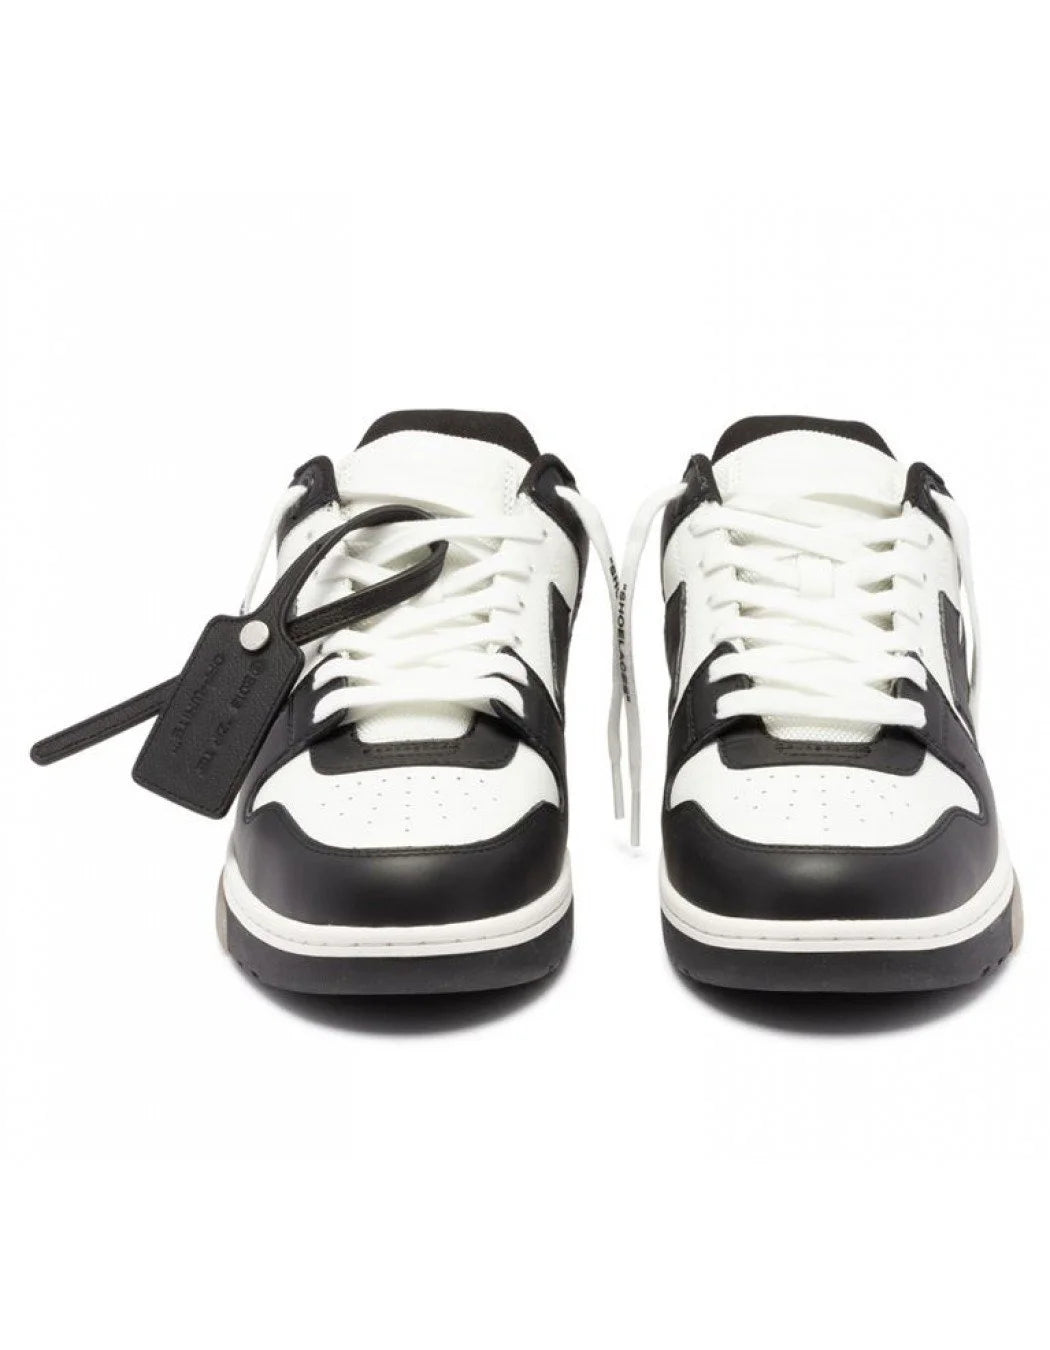 OFF-WHITE Out Of Office "OOO" Low "Black White"